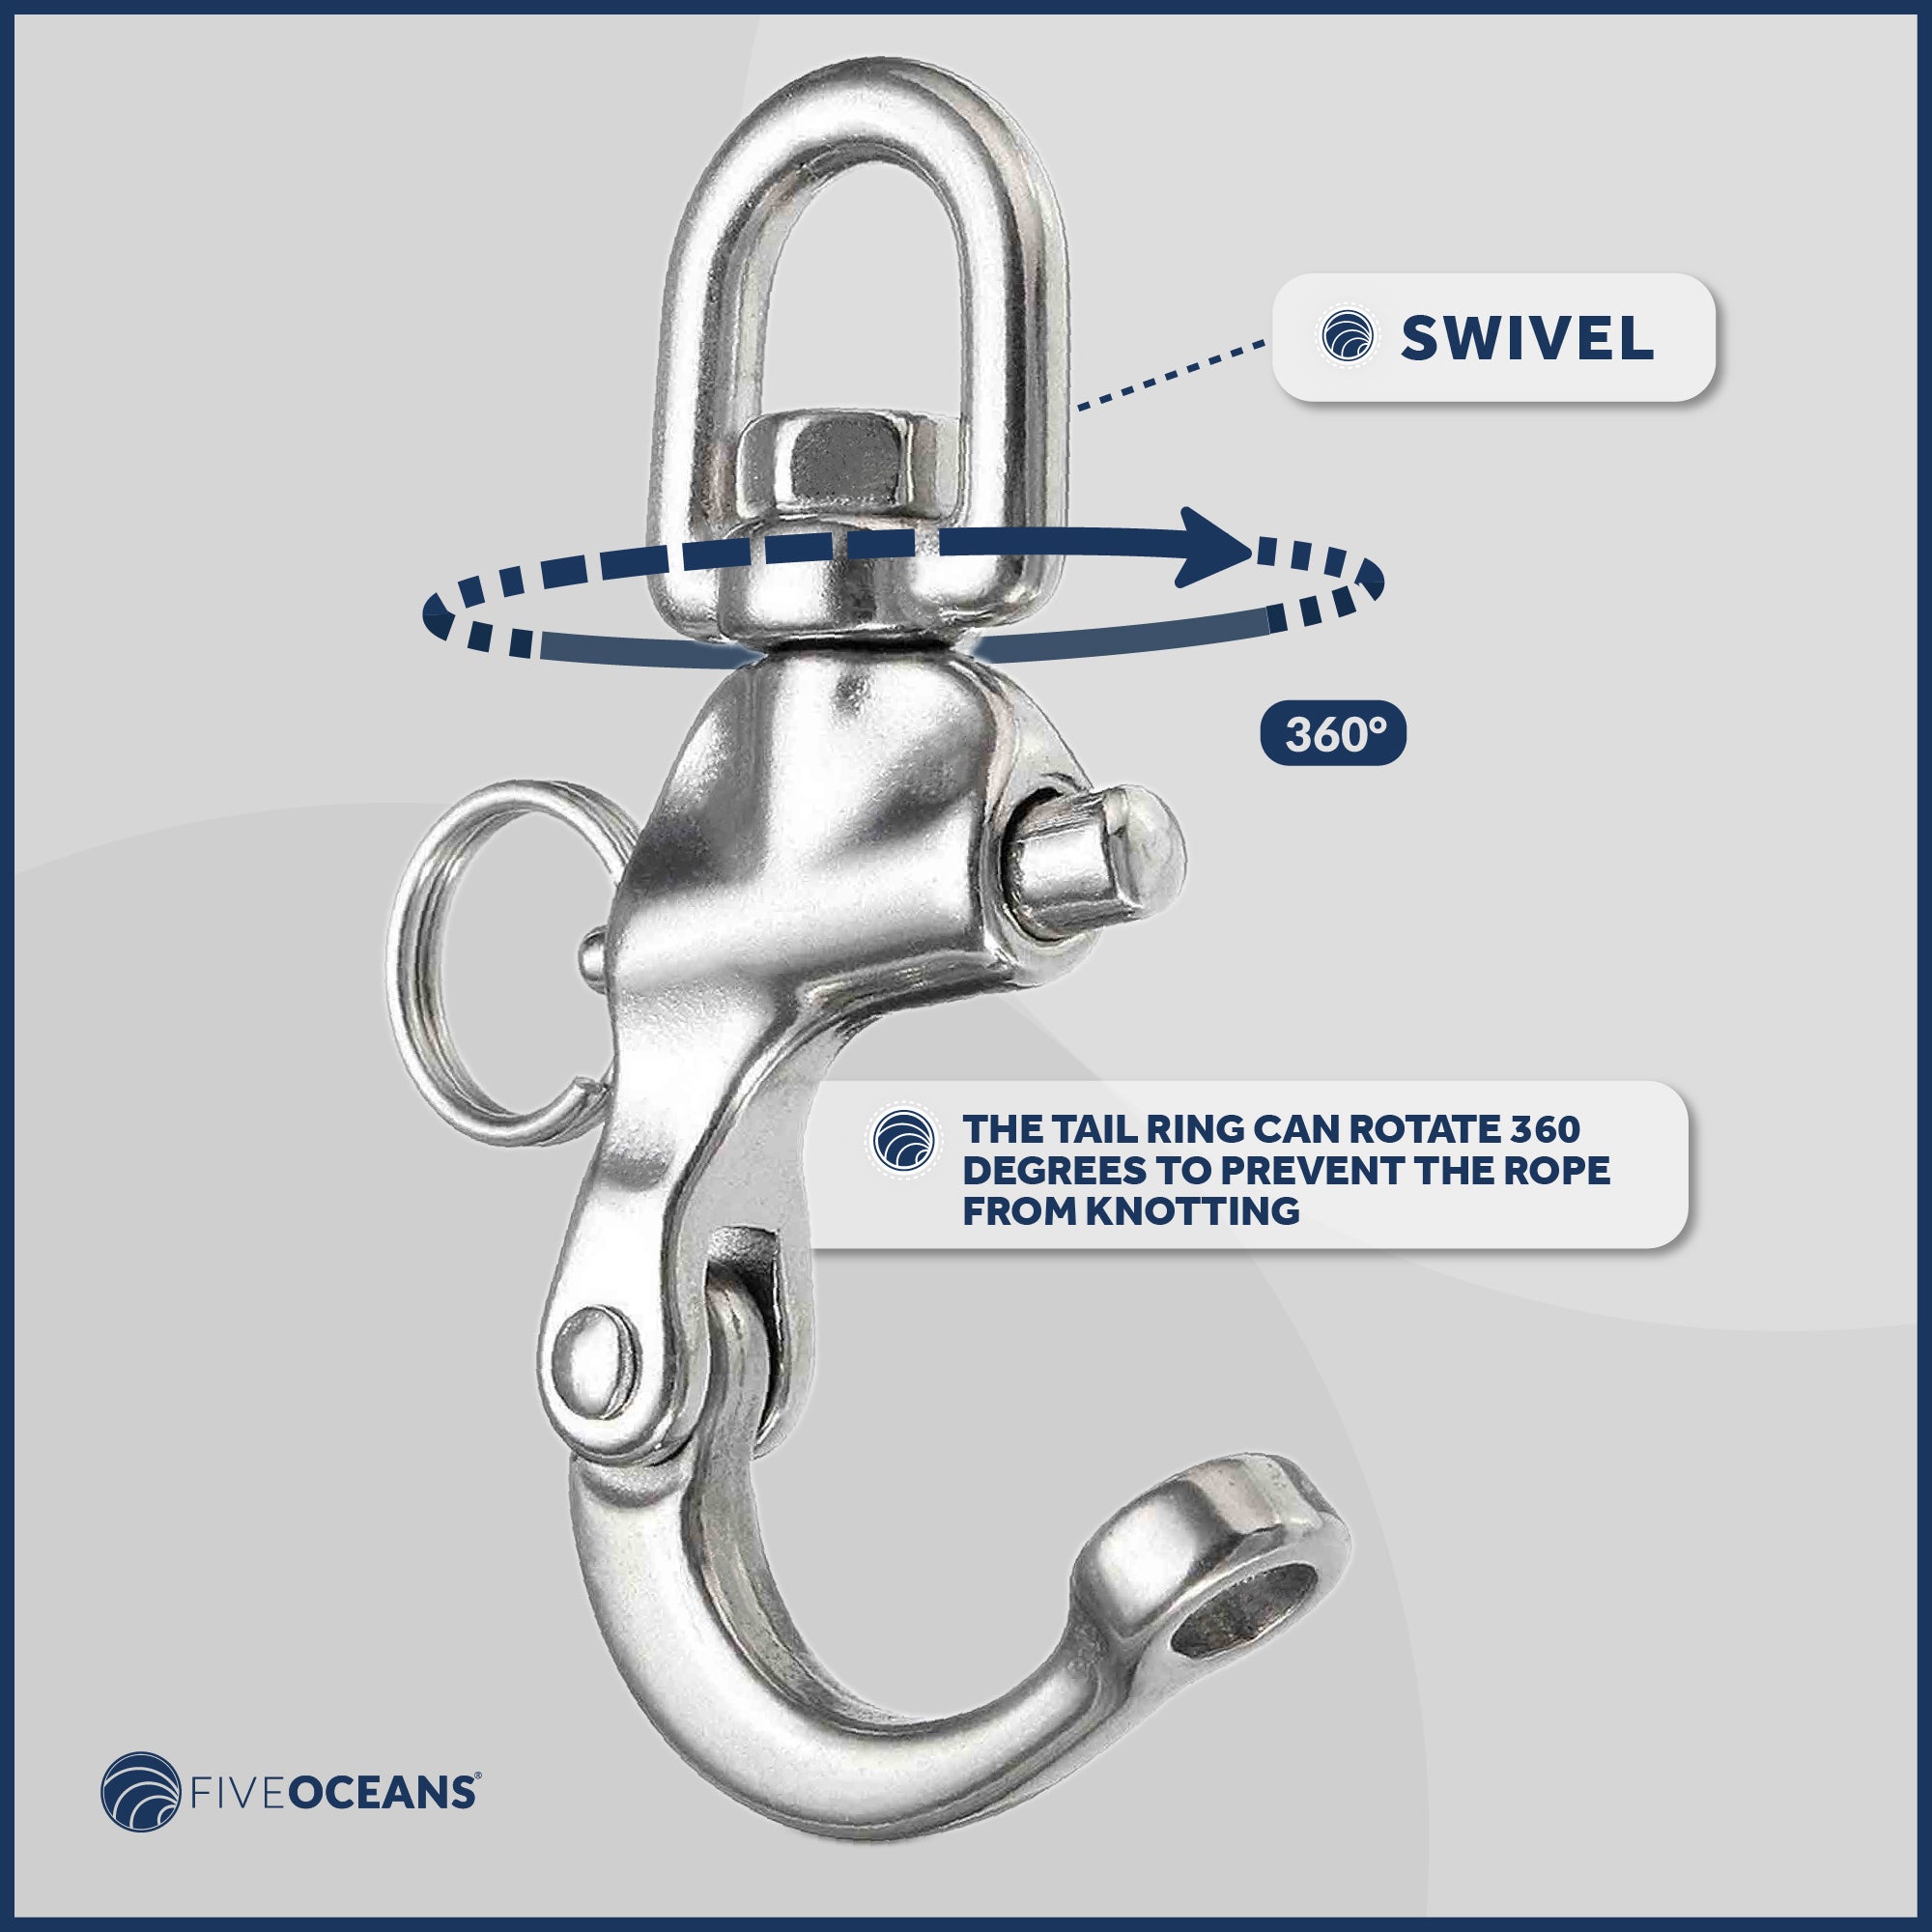 Swivel Eye Snap Shackle Quick Release Bail Rigging, 2 3/4" Stainless Steel 2-Pack - FO443-M2